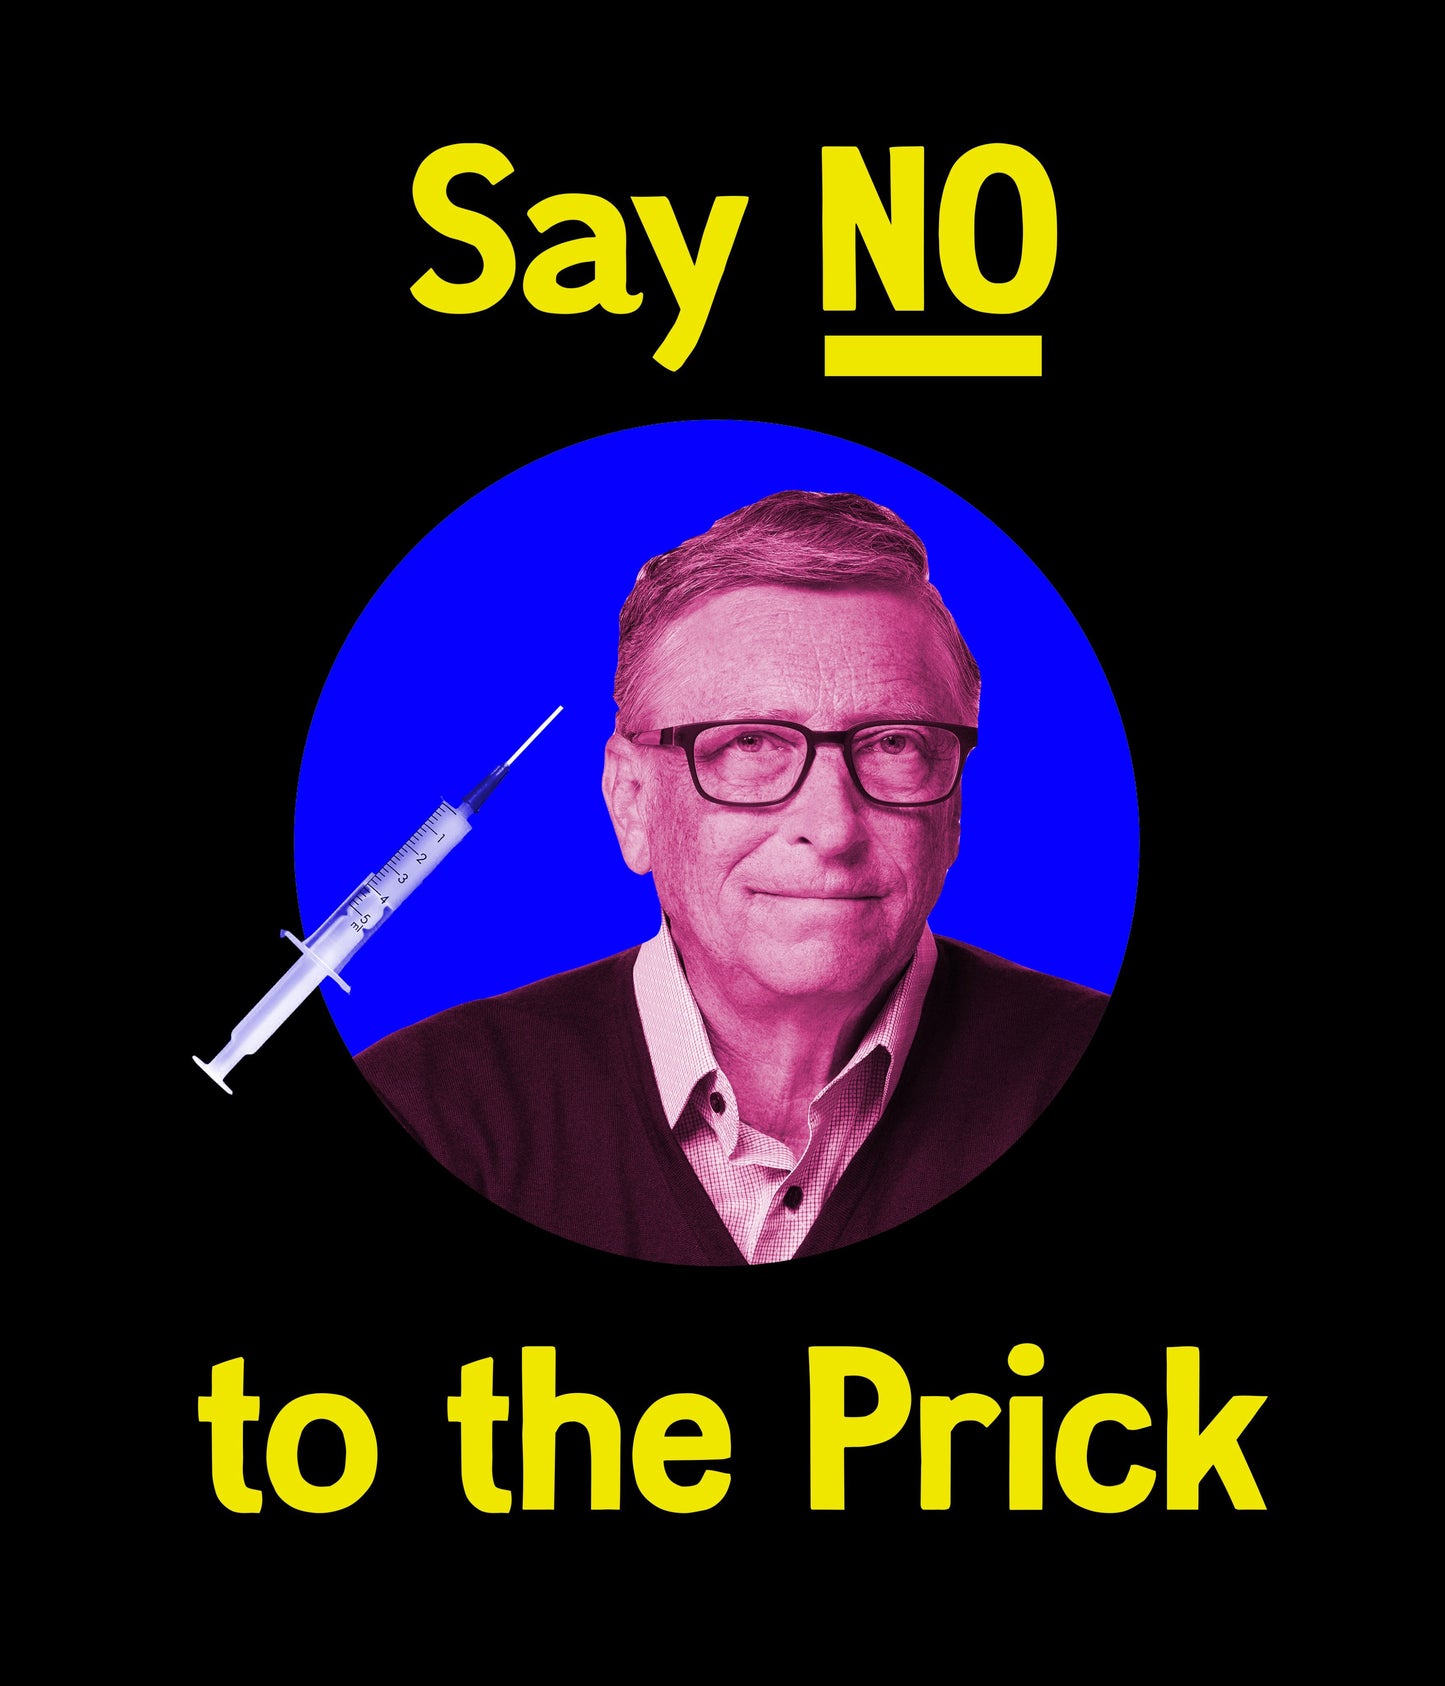 "Say NO to the Prick"